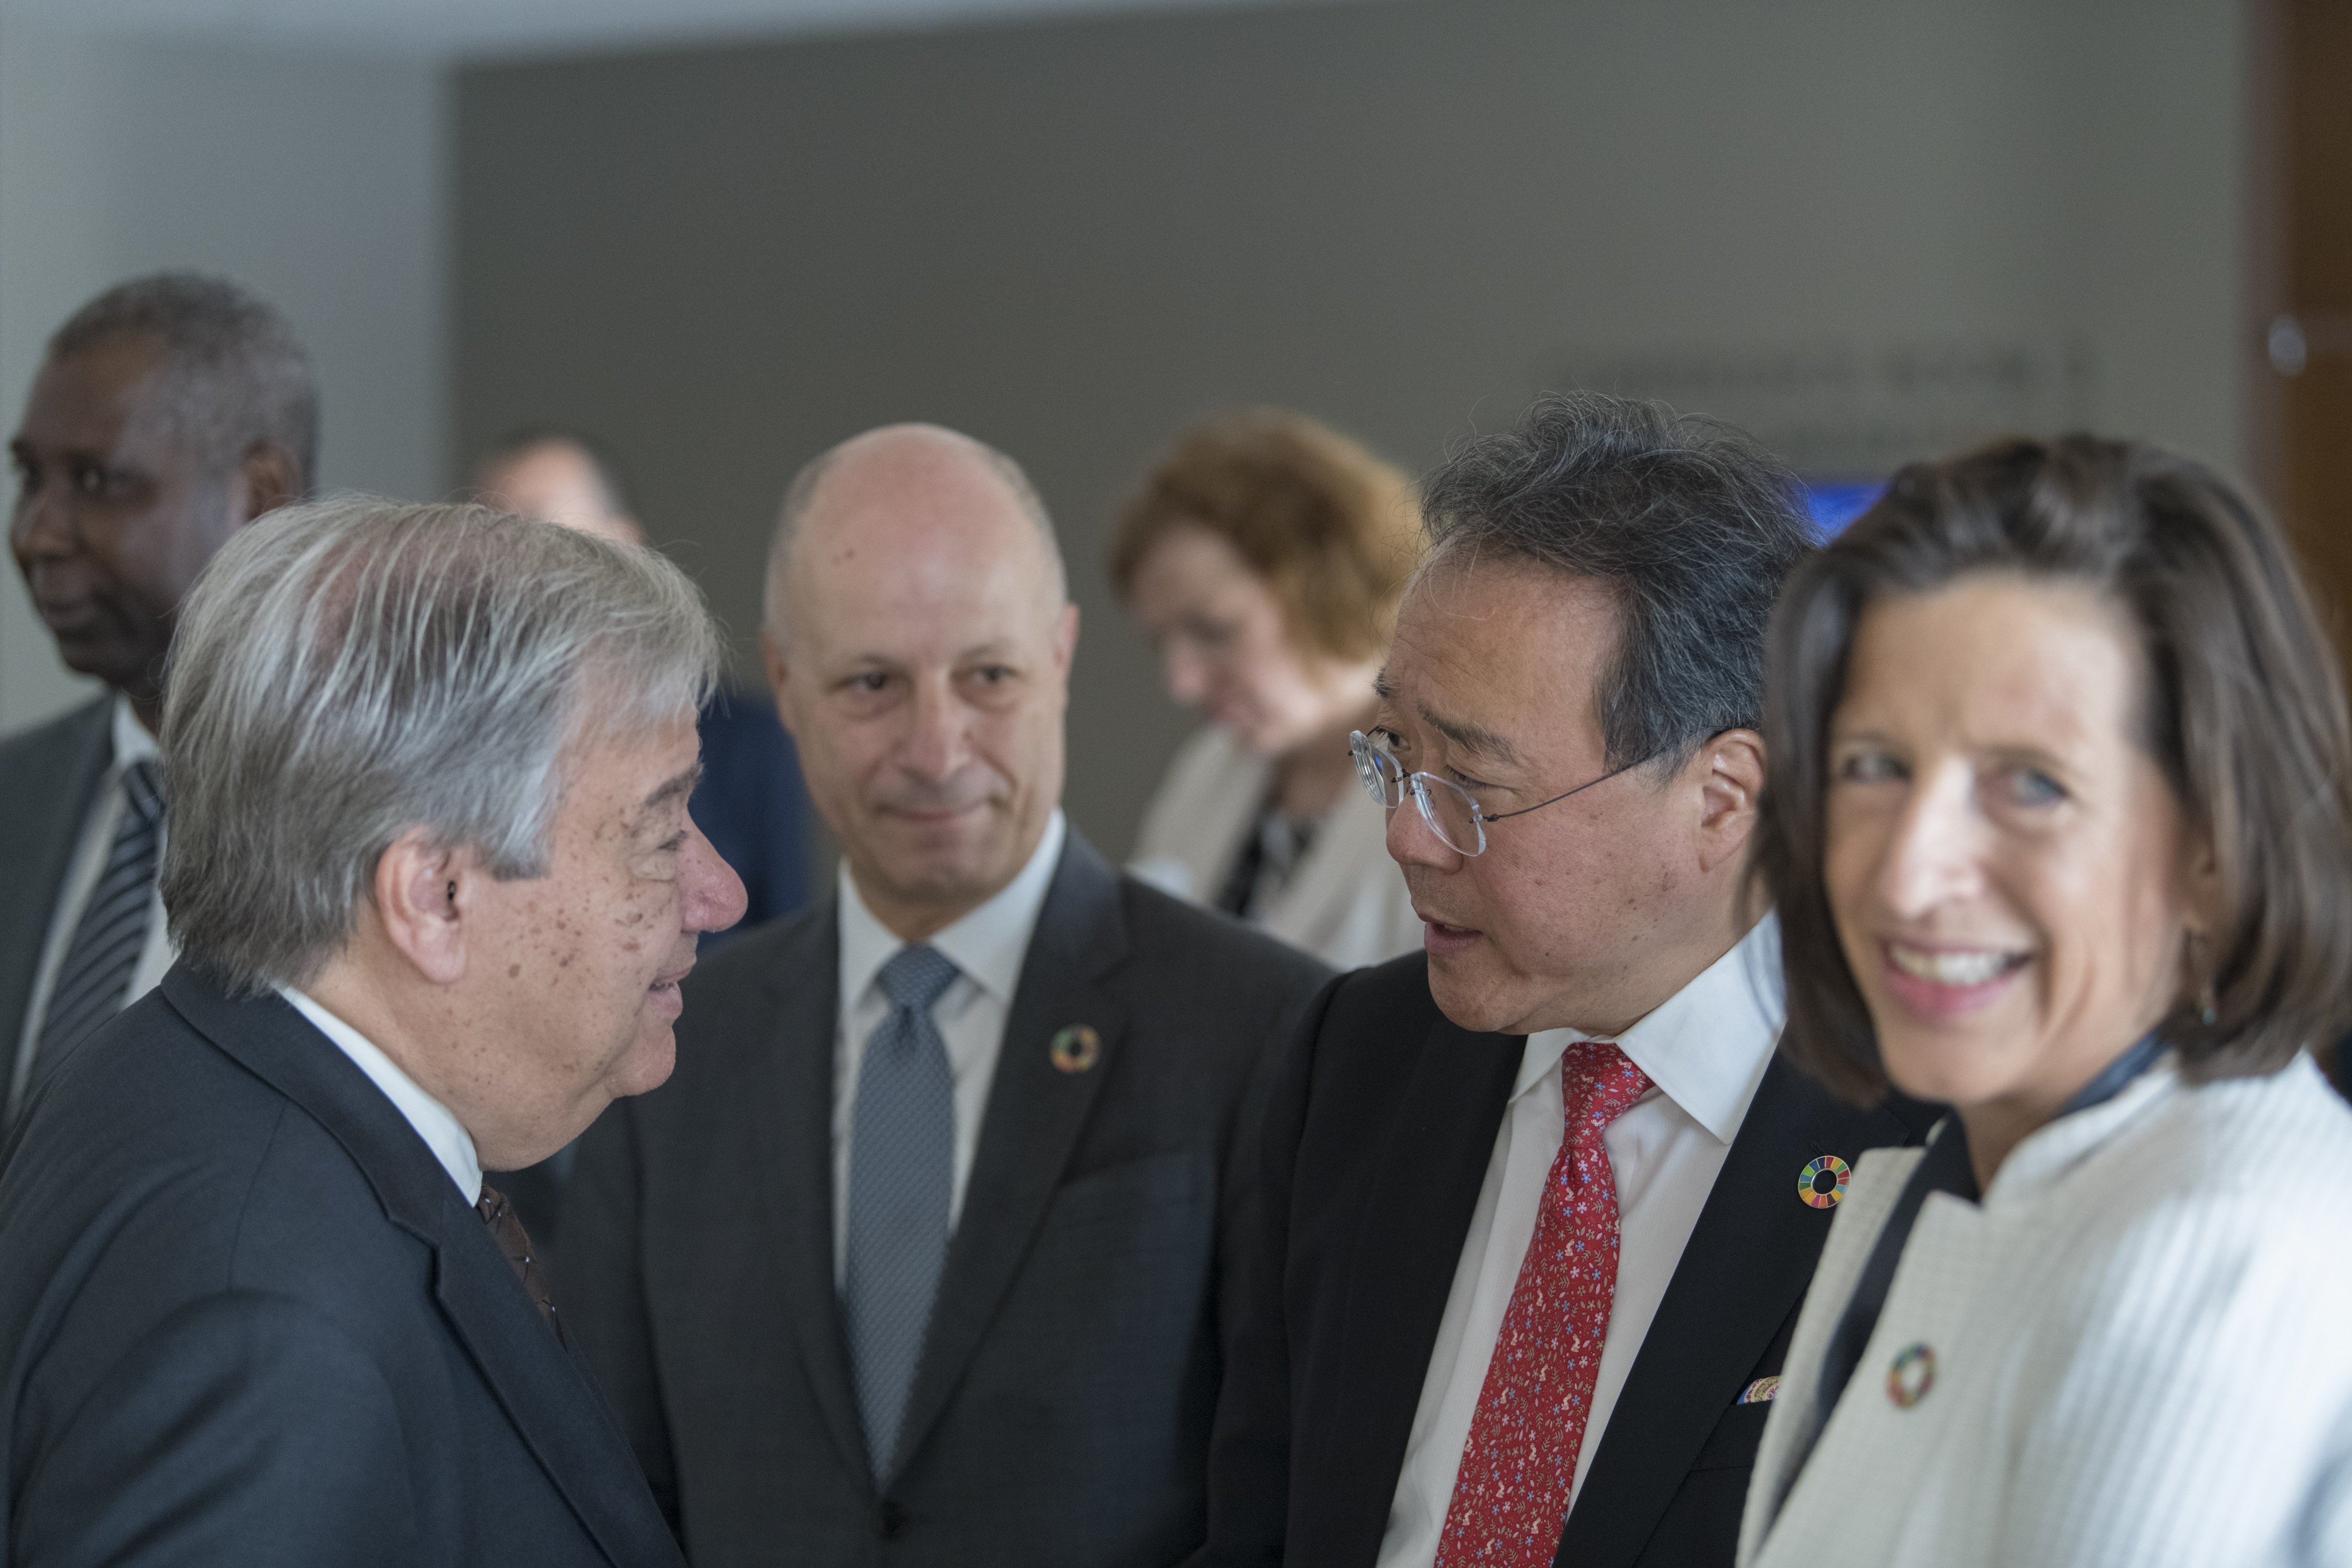 Secretary-General Antnio Guterres speaks with Yo-Yo Ma, UN Messenger of Peace, at the Peace Bell ceremony in observance of the International Day of Peace (21 September). 20 Sept 2019. 51Թ, New York/UN Photo/Mark Garten